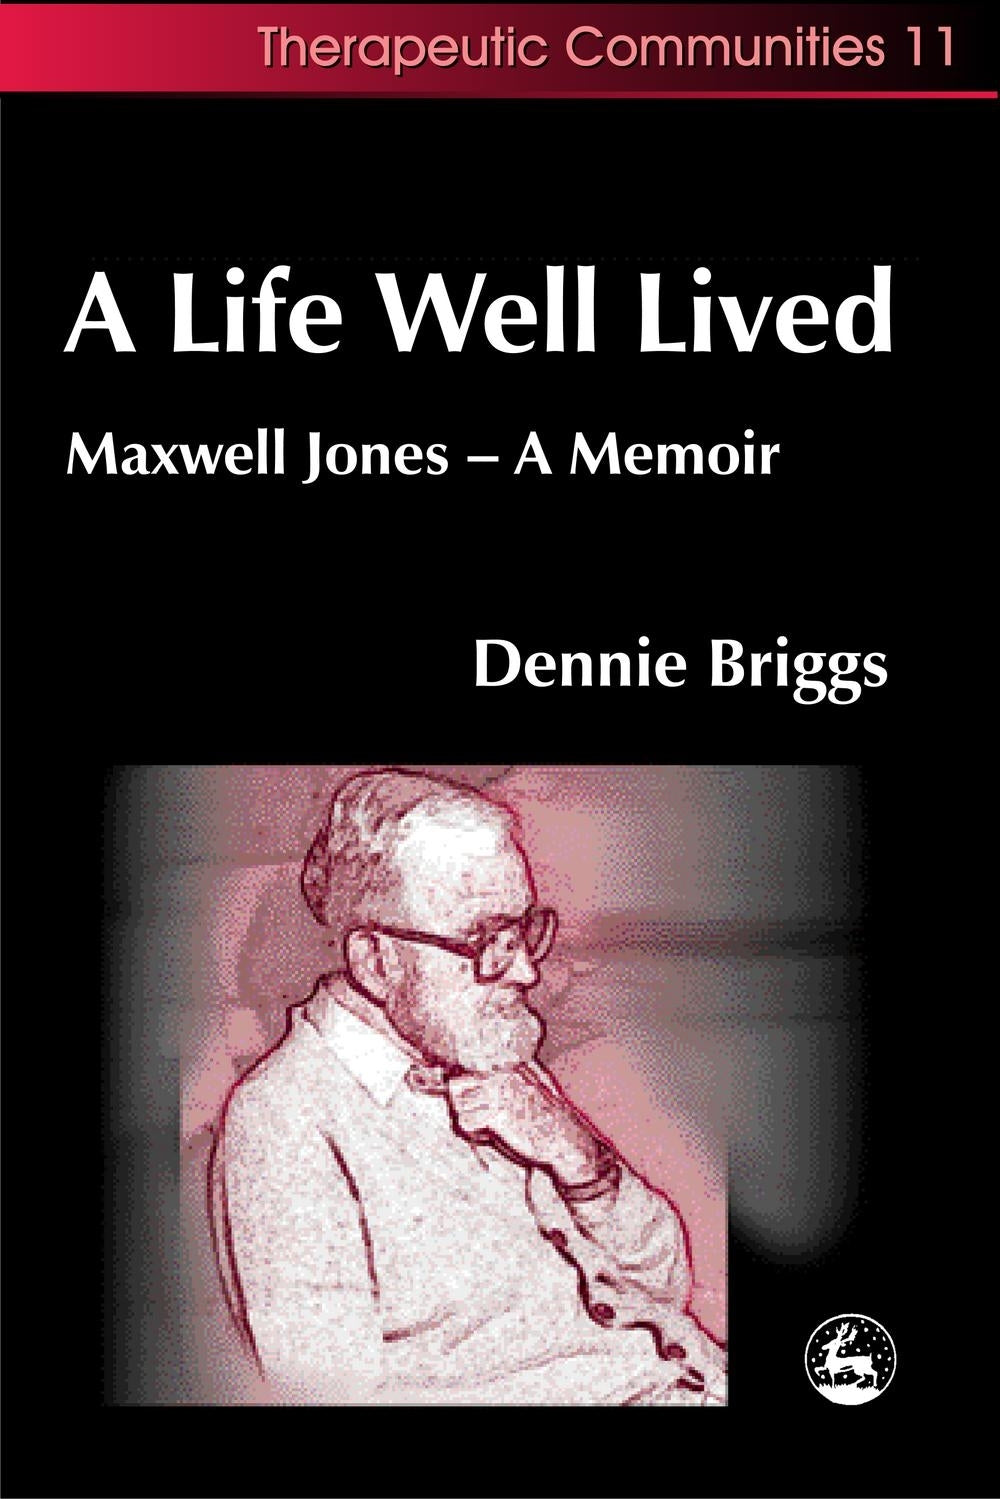 A Life Well Lived by Dennie Briggs